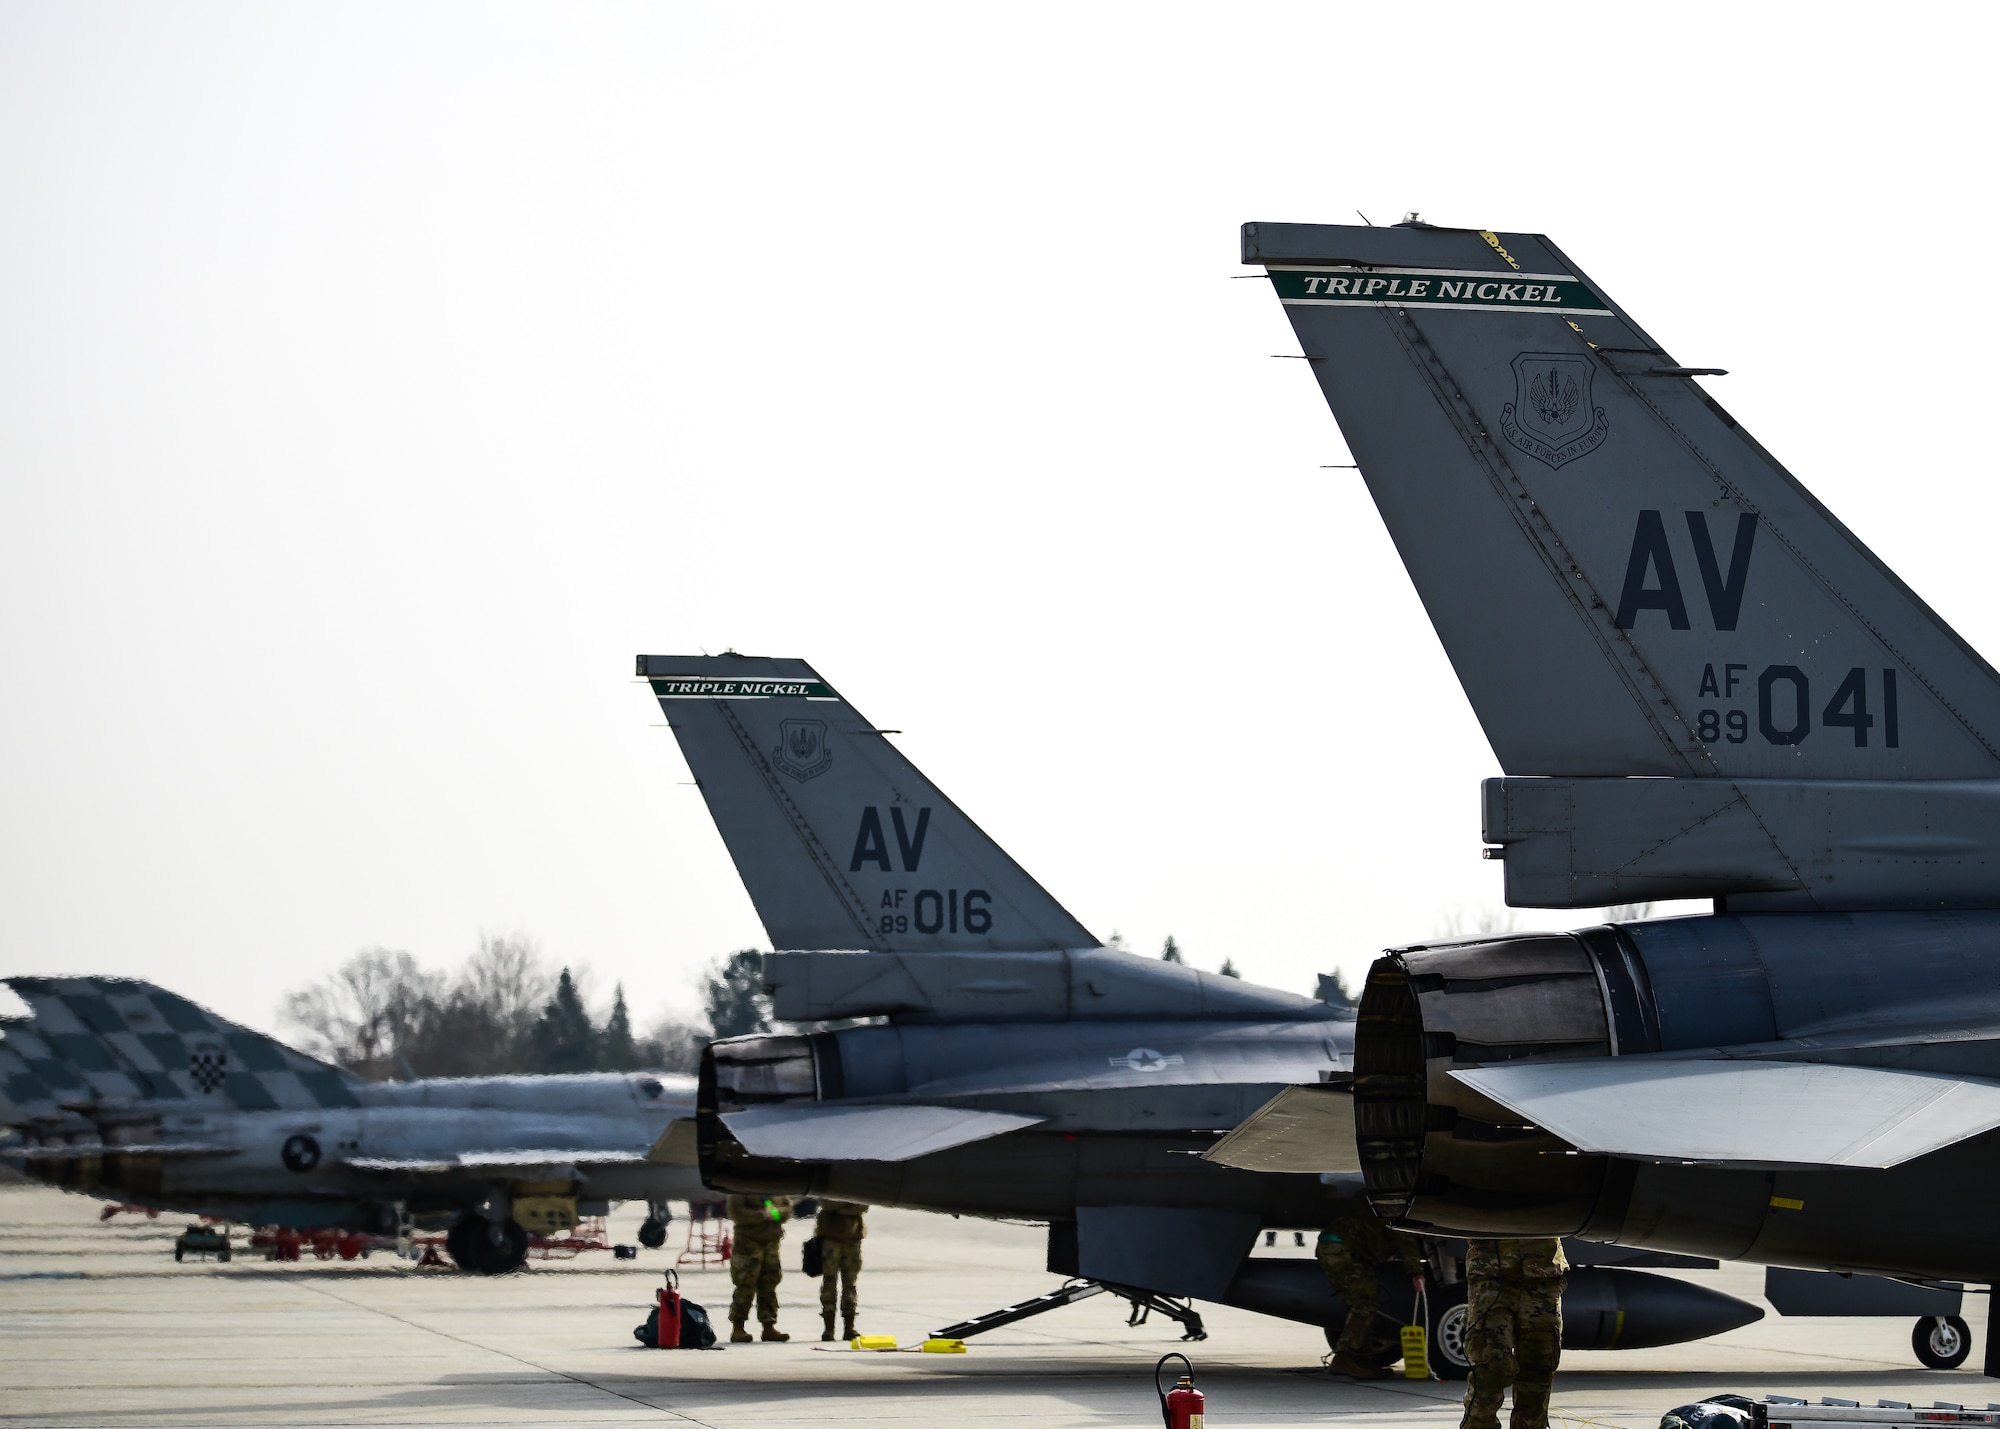 Two U.S. Air Force F-16C Fighting Falcon aircraft assigned to the 555th Fighter Squadron from the 31st Fighter Wing, Aviano Air Base, Italy, fire up jets next to Croatian MiG-21 aircraft assigned to the 191st Fighter Squadron at Croatia’s 91st Air Base at Pleso, March 17, 2022. The 31st FW executed routine Agile Combat Employment operations with Croatian Allies during this flight. Interoperability in Croatia will build Allied and partner capabilities throughout Southeast Europe and into the Mediterranean Sea. (U.S. Air Force photo by Tech. Sgt. Miquel Jordan)